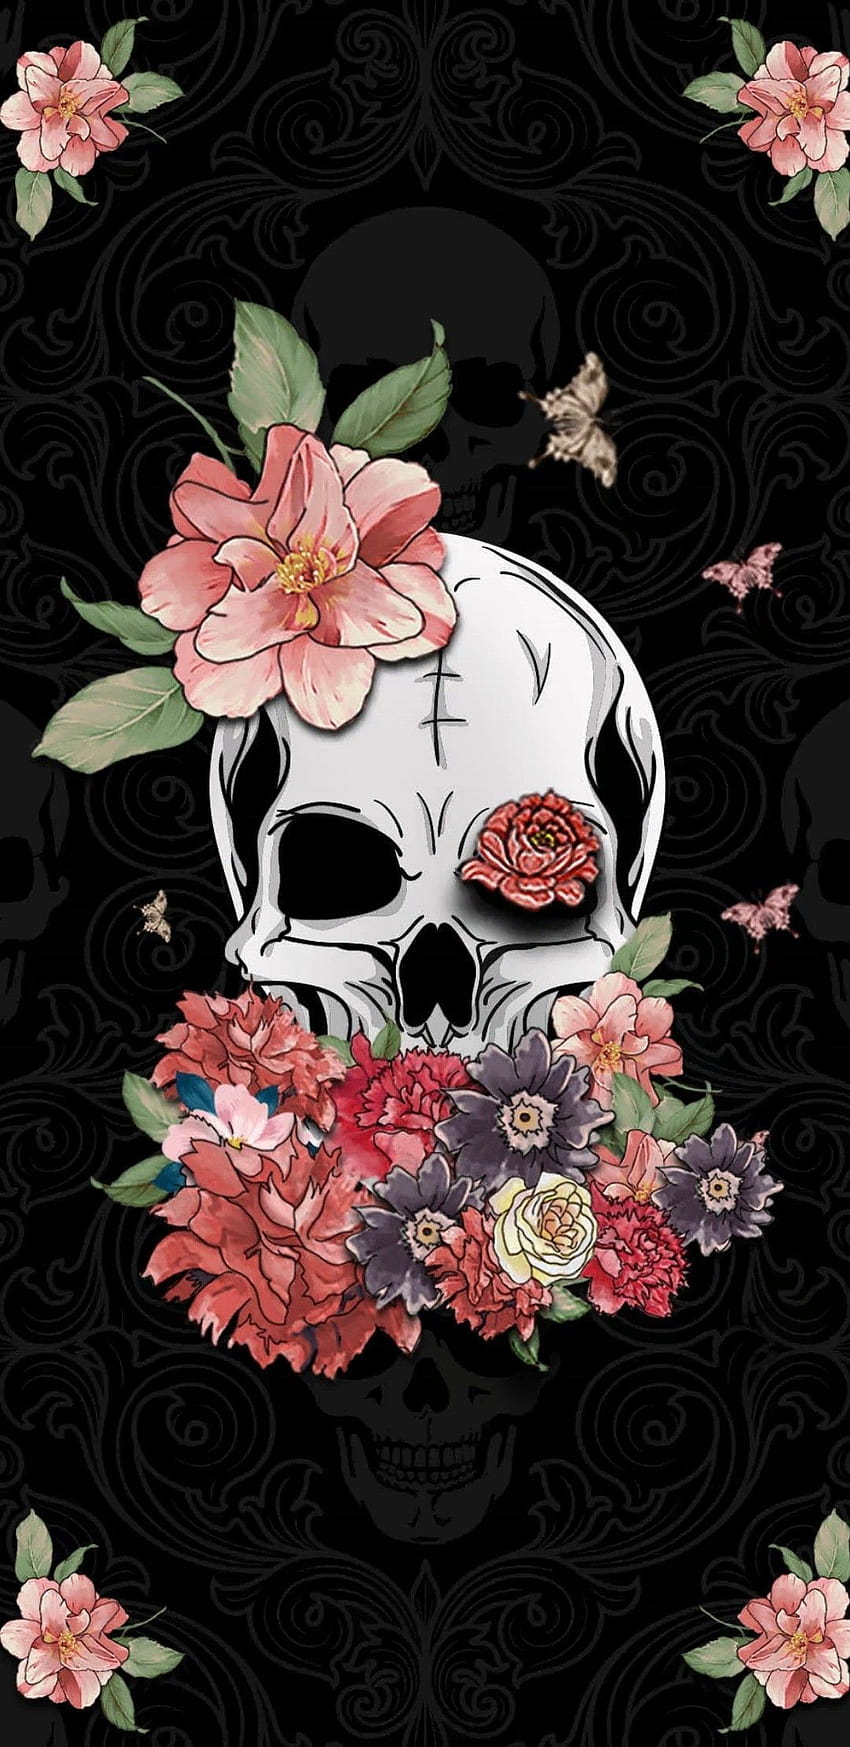 Vintage Floral Skull on Dog, skull and roses aesthetic HD phone wallpaper